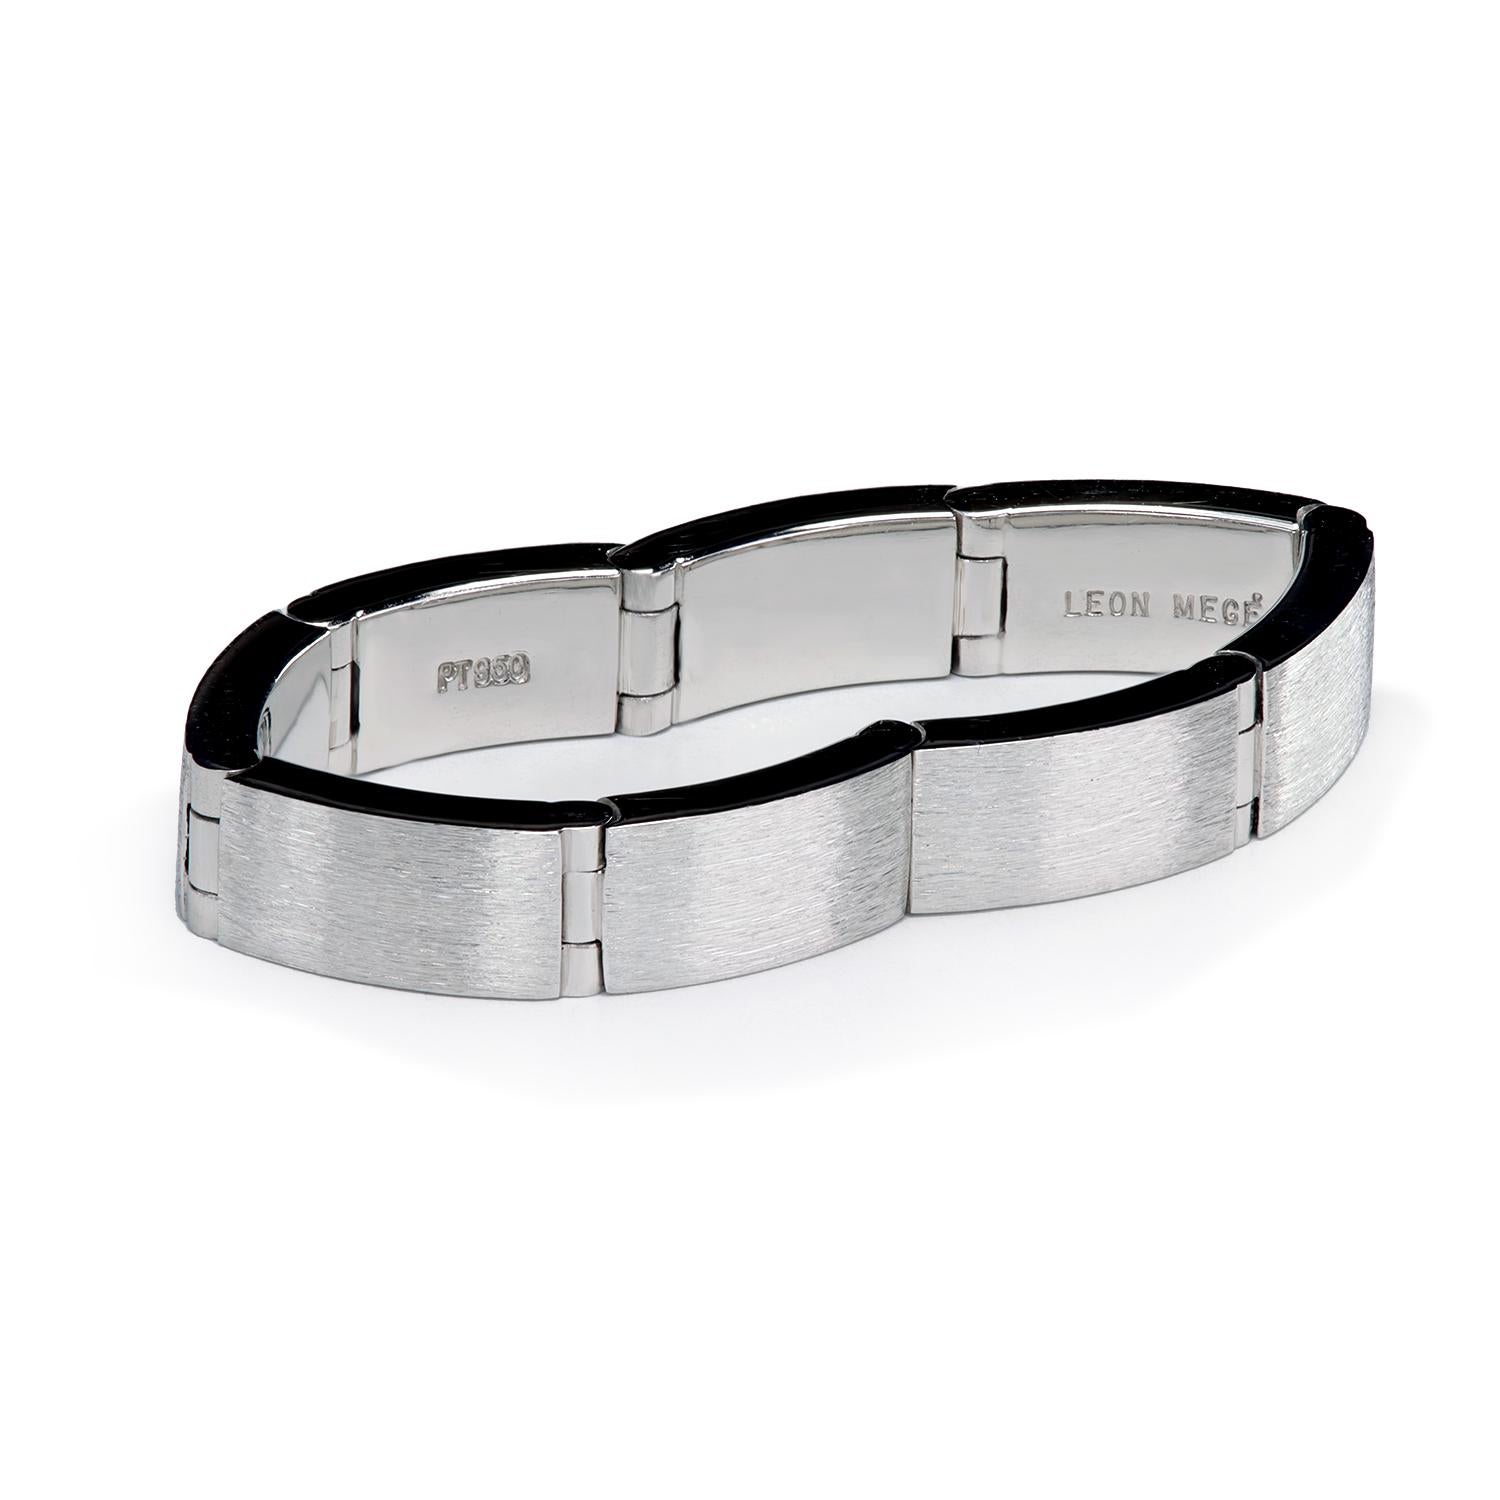 4 mm wide platinum flexible (hinged) band with brushed finish. 

Whether you wear this ring to a black tie dinner at the benefit for a disabled cat or to a biker's bar brawl, this ring will keep your wedding finger in a feather-like soft comfort.